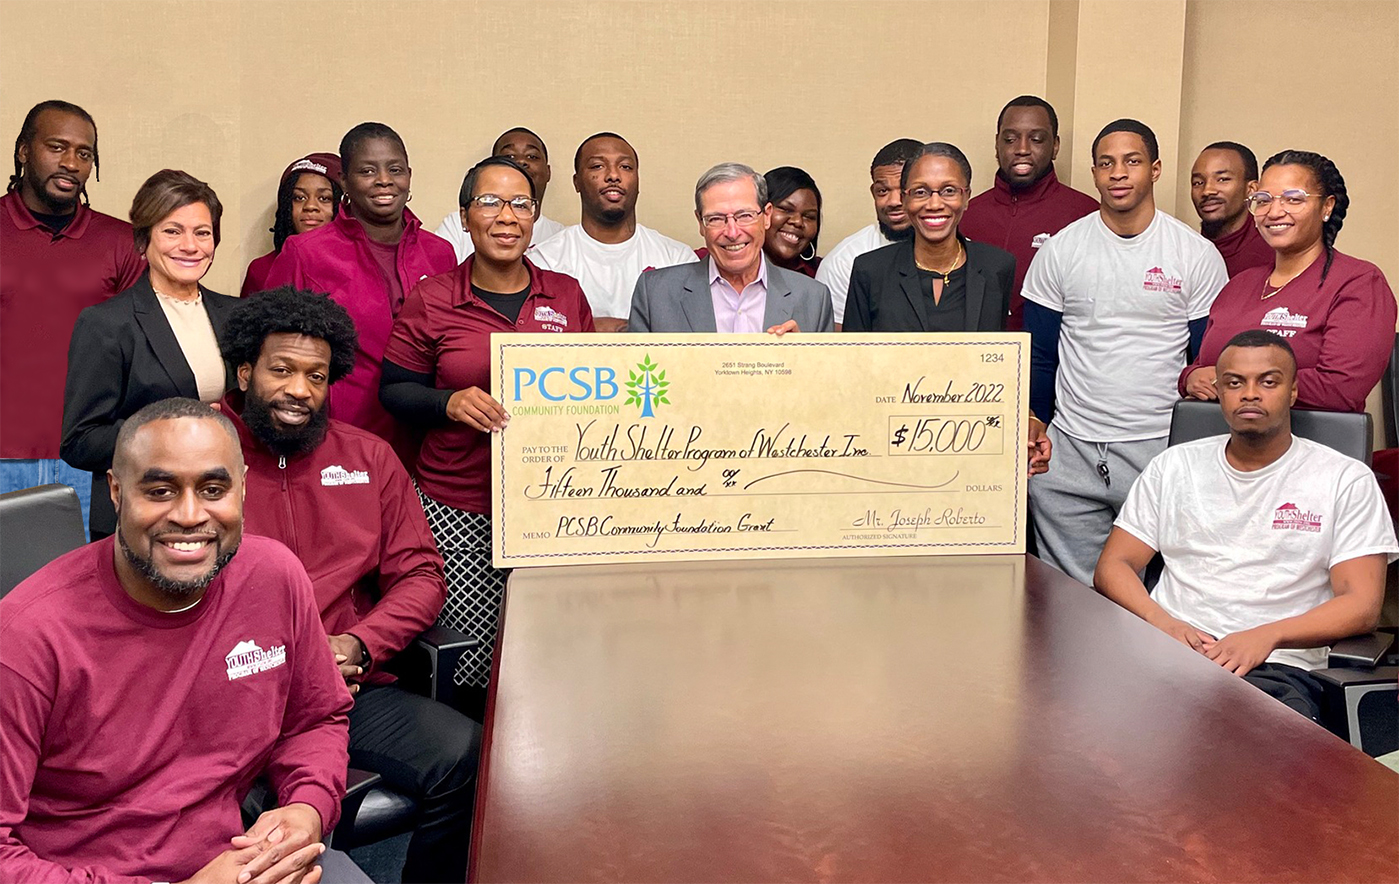 PCSB Community Foundation Chair Joe Roberto presents an oversized grant check to the Youth Shelter Program of Westchester Inc, and is joined by a large group of nonprofit staff from that organization who huddle around the check presentation.